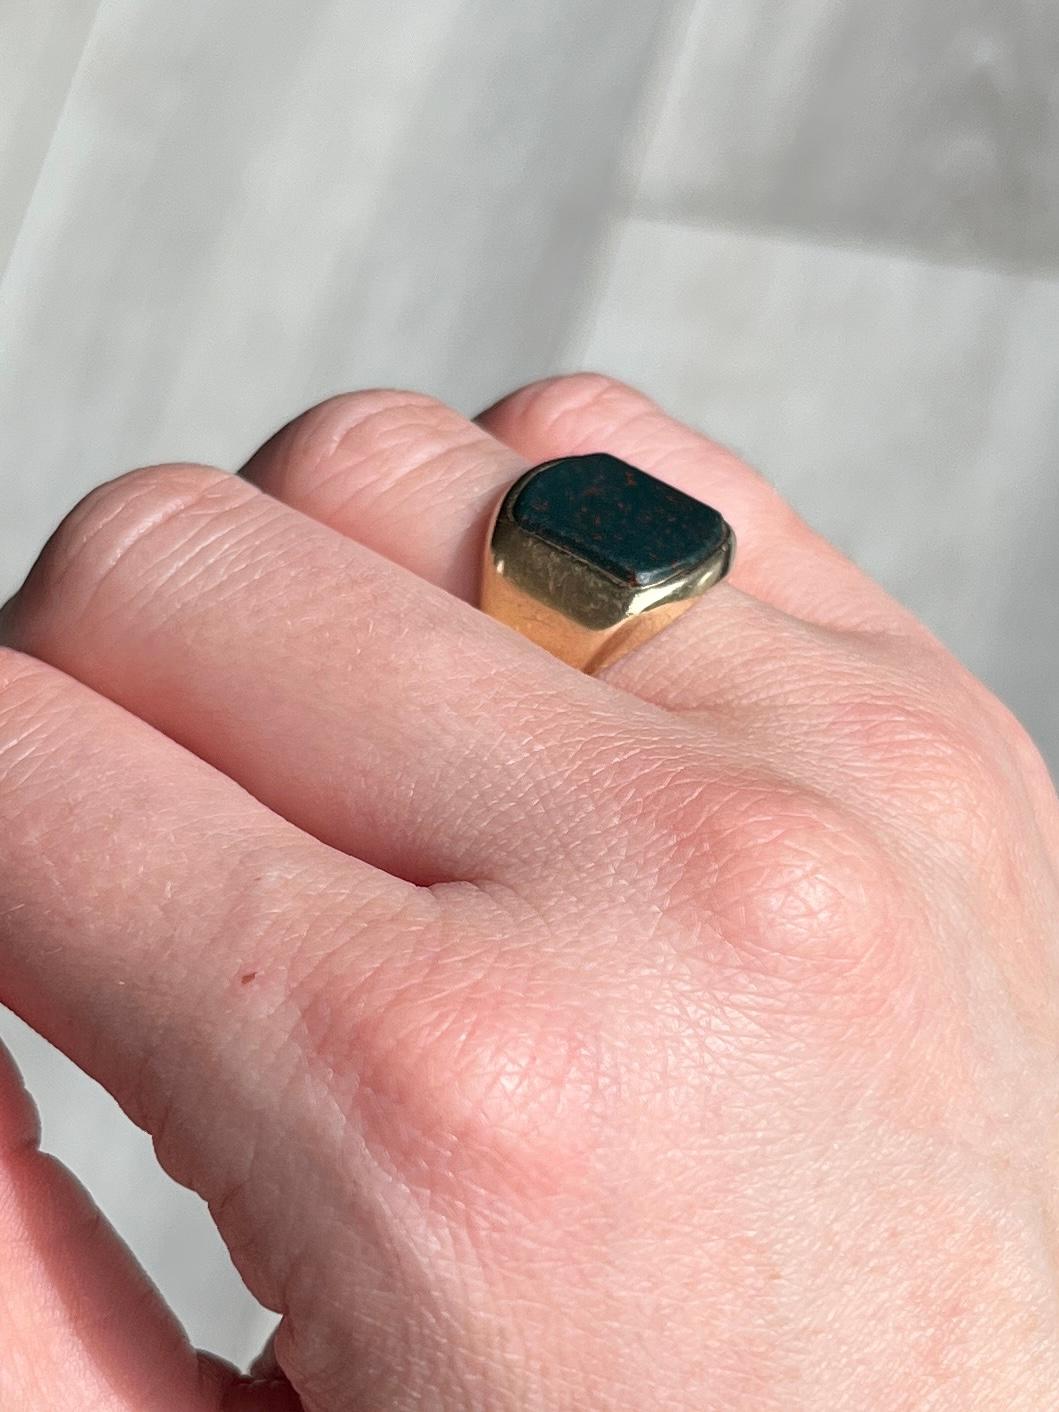 This gorgeous signet ring has a bloodstone set within the 9carat gold band. The stone is deep green with flecks of red running through. Fully hallmarked Birmingham 1971.

Ring Size: J 1/2 or 5
Stone dimensions: 12x11mm 

Weight: 6.8g 